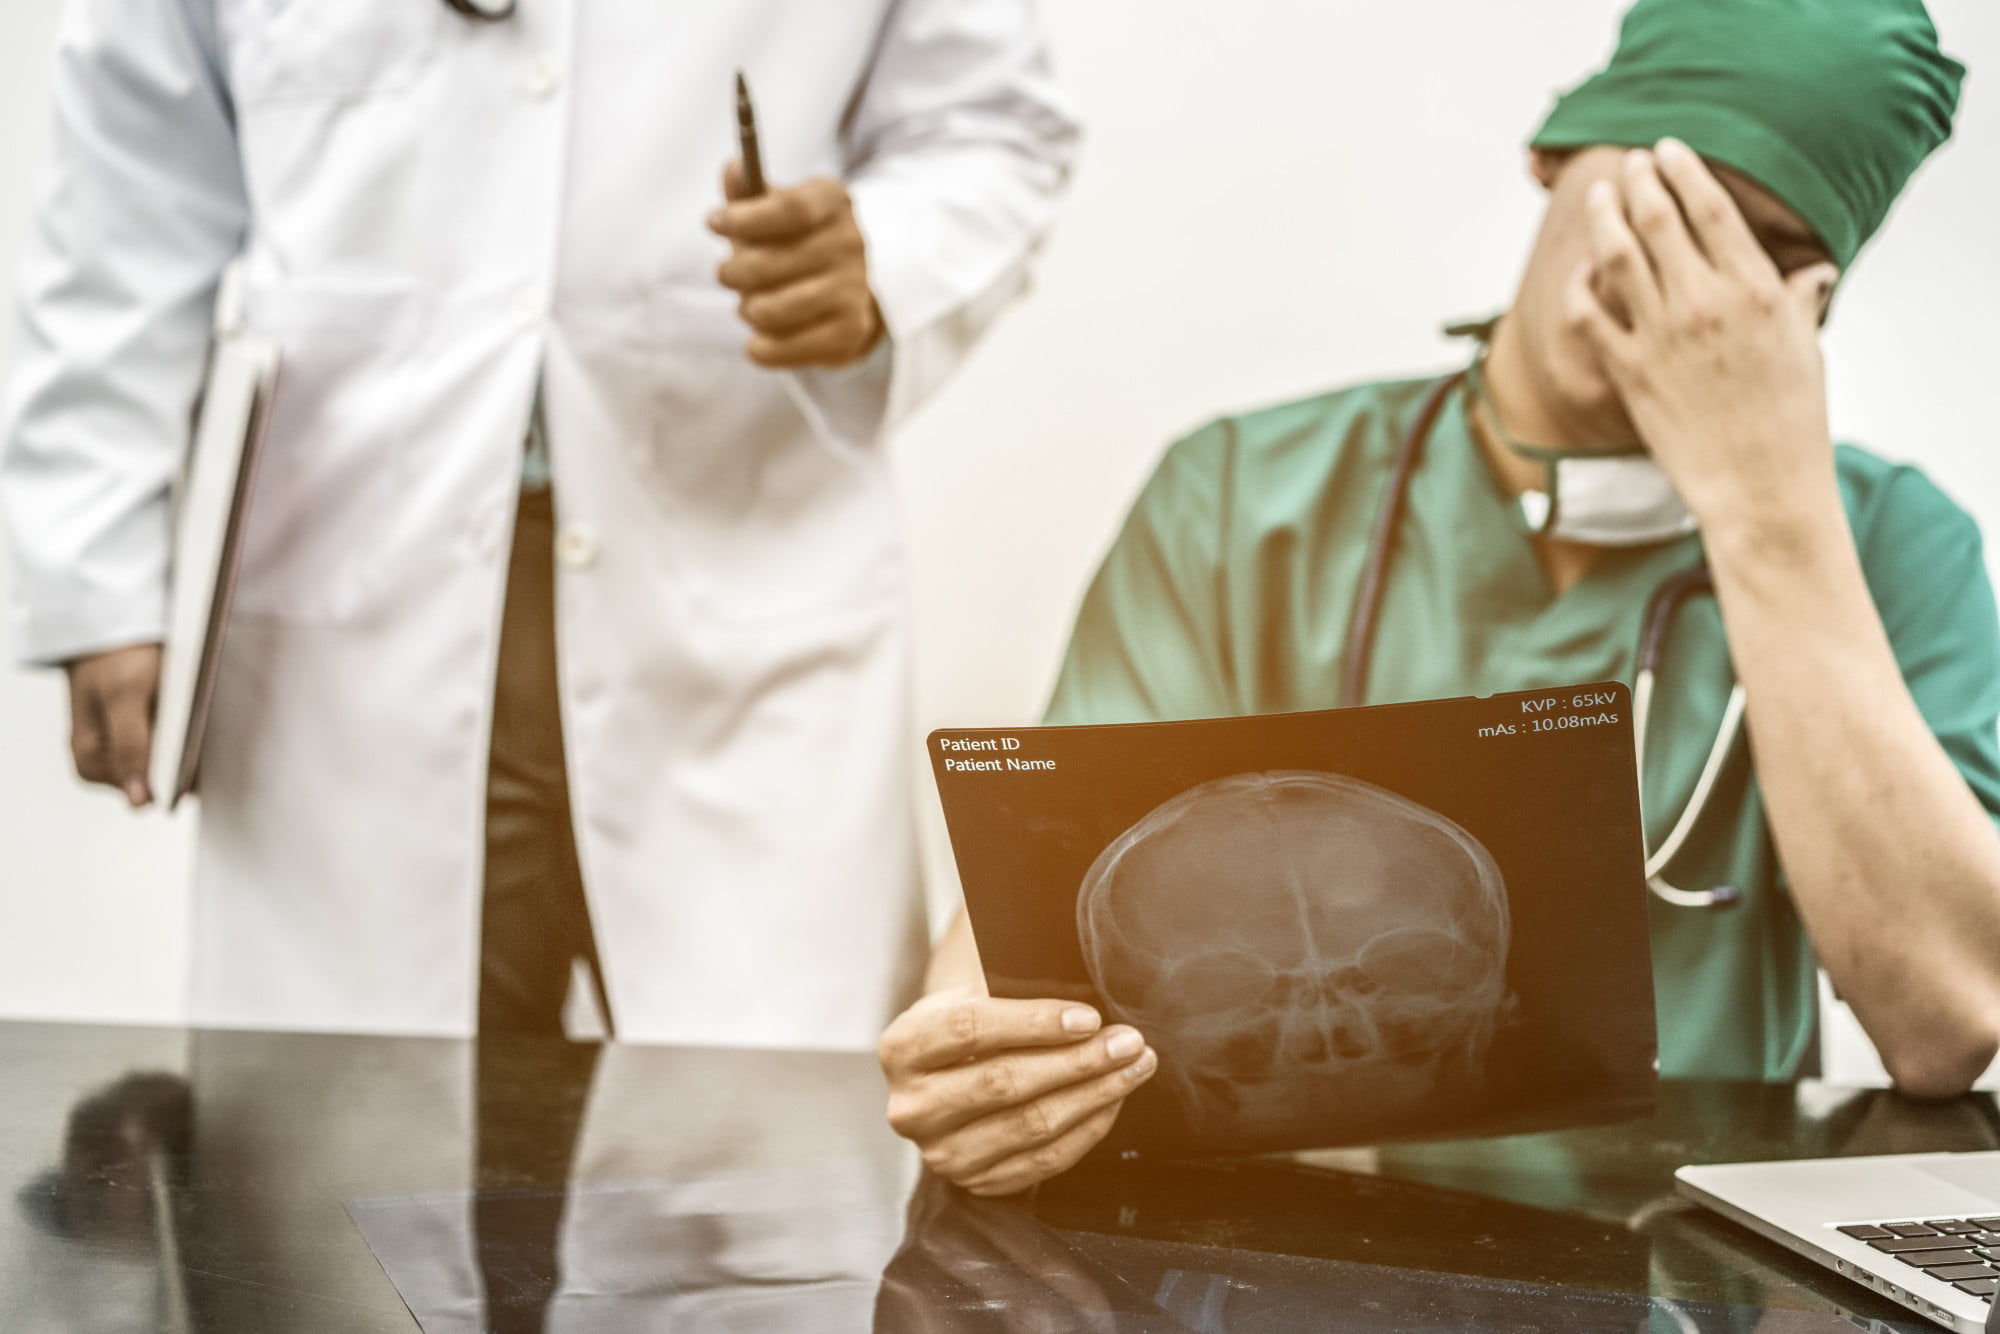 Are you wondering what you should look for when choosing medical negligence attorneys? Read on and learn more about it here.